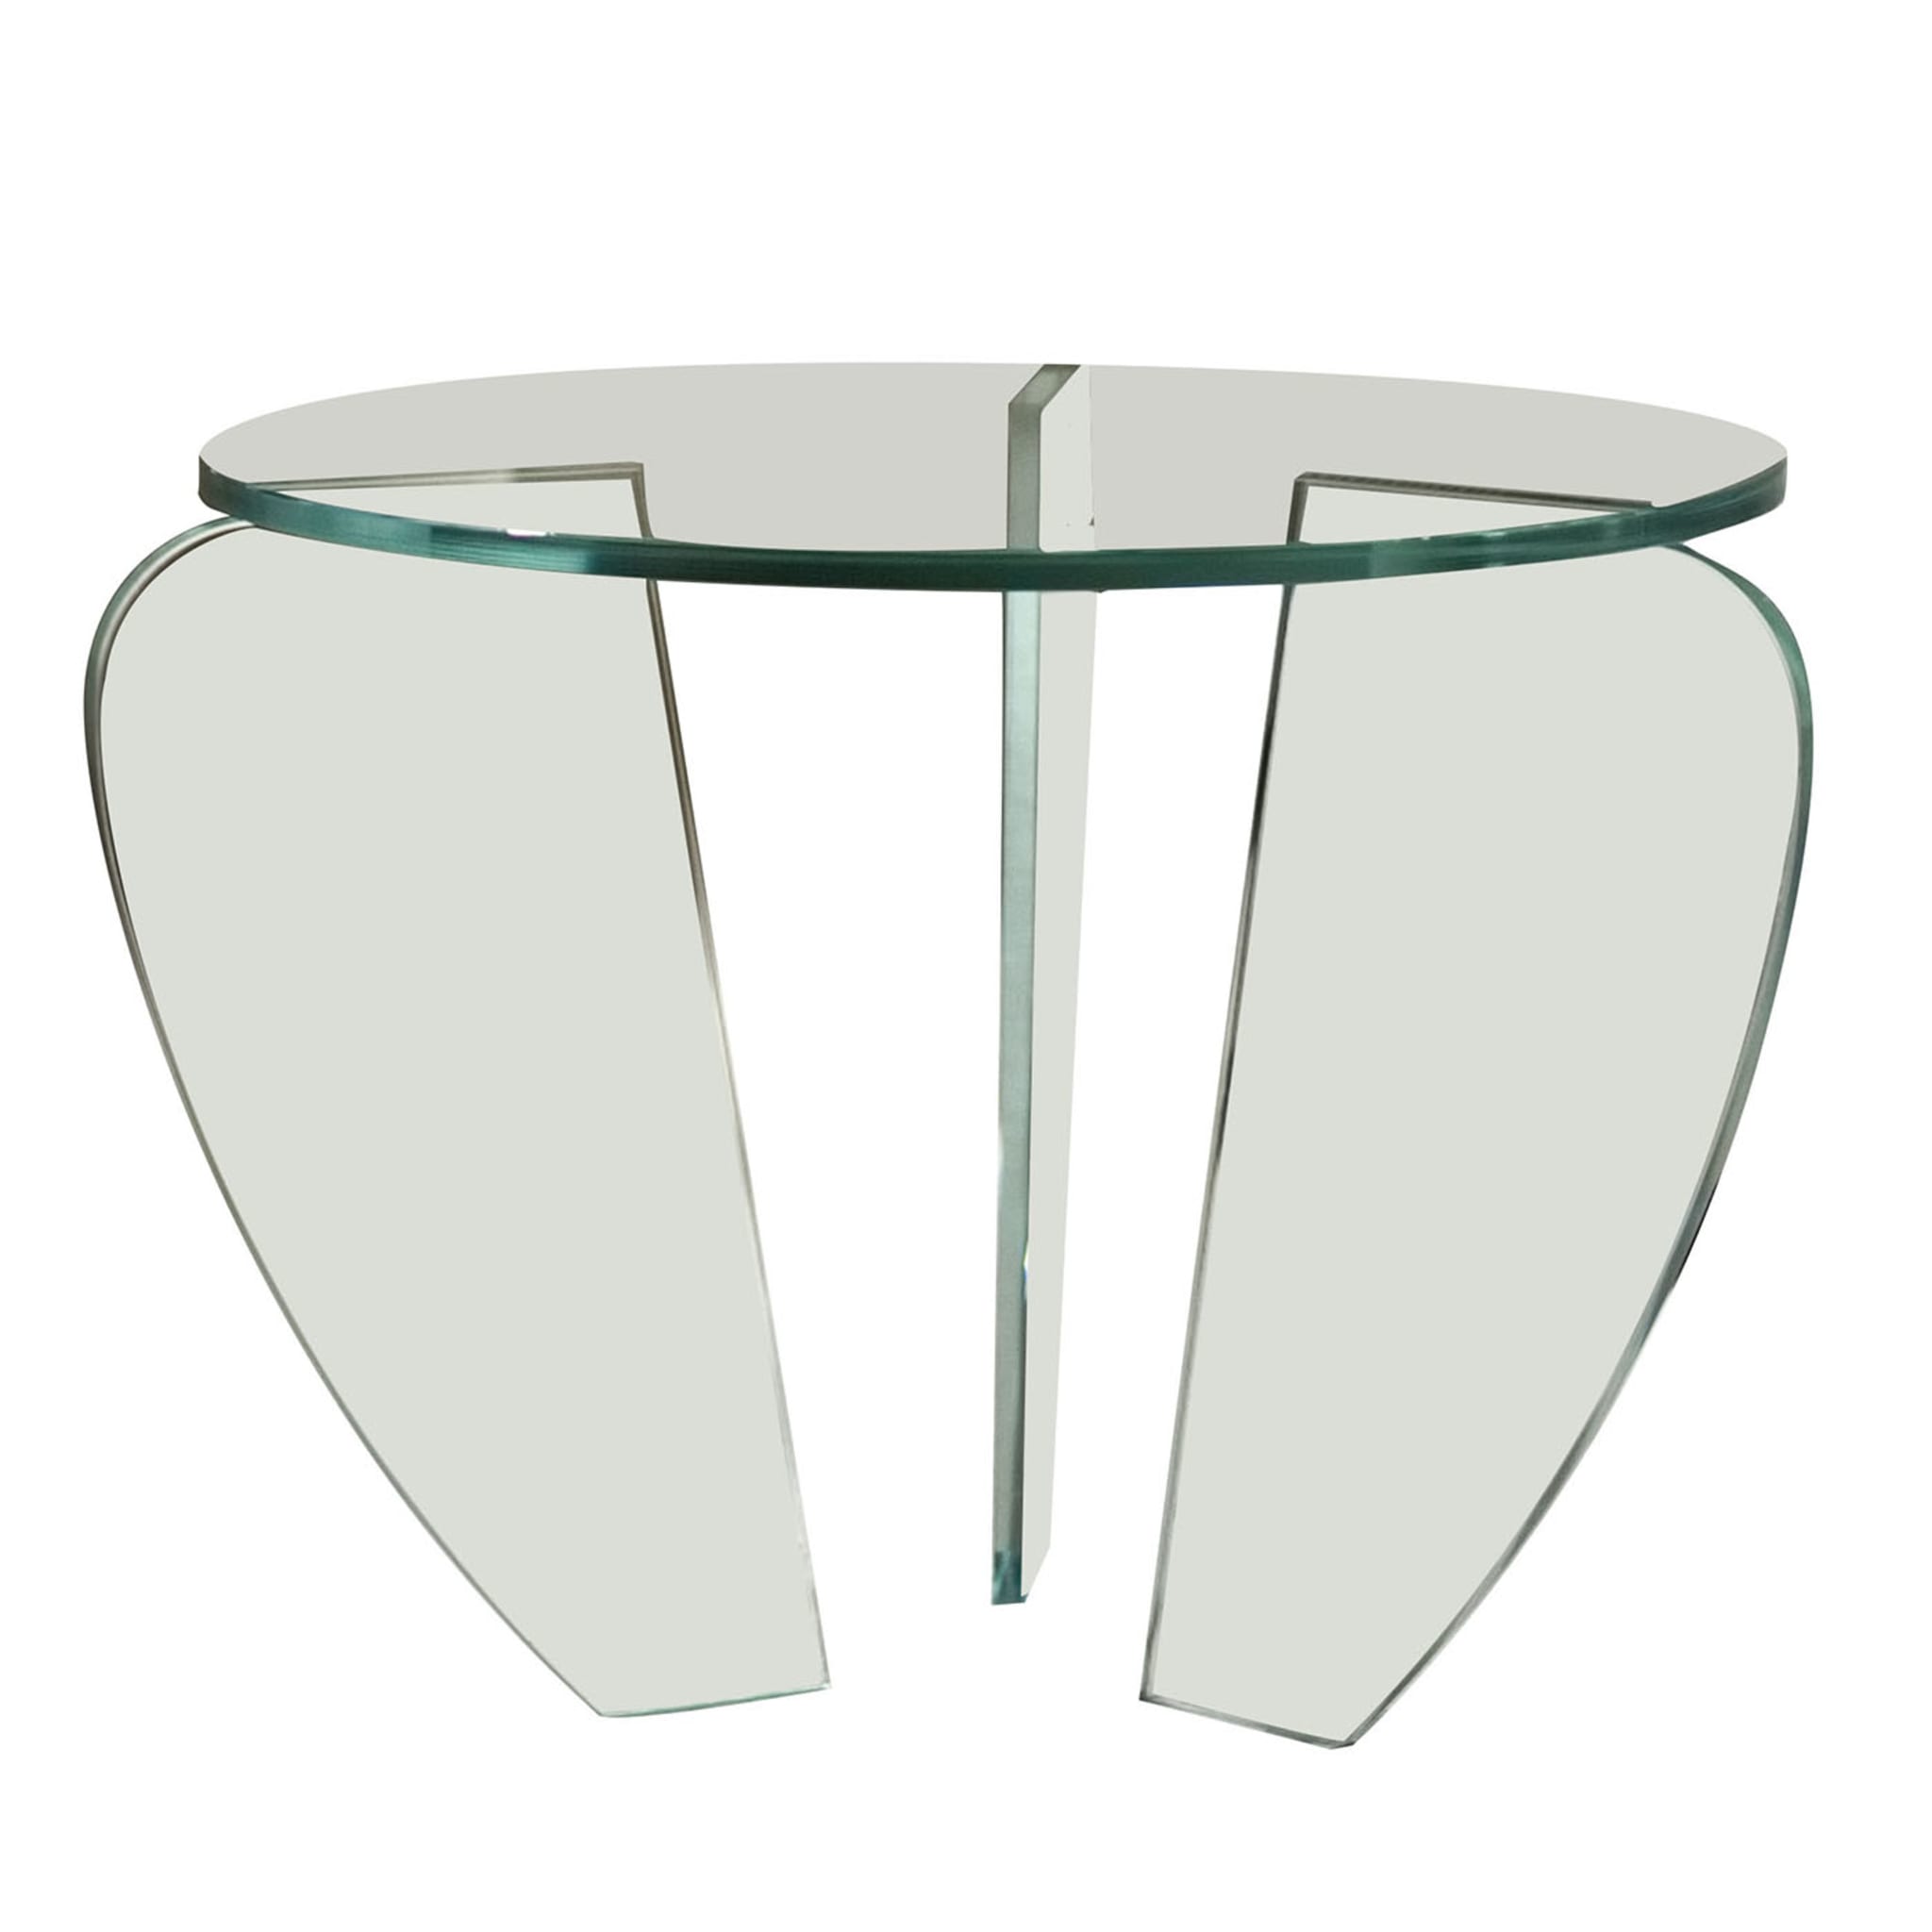 Teo Medium Transparent Side Table by Andrea Petterini - Main view